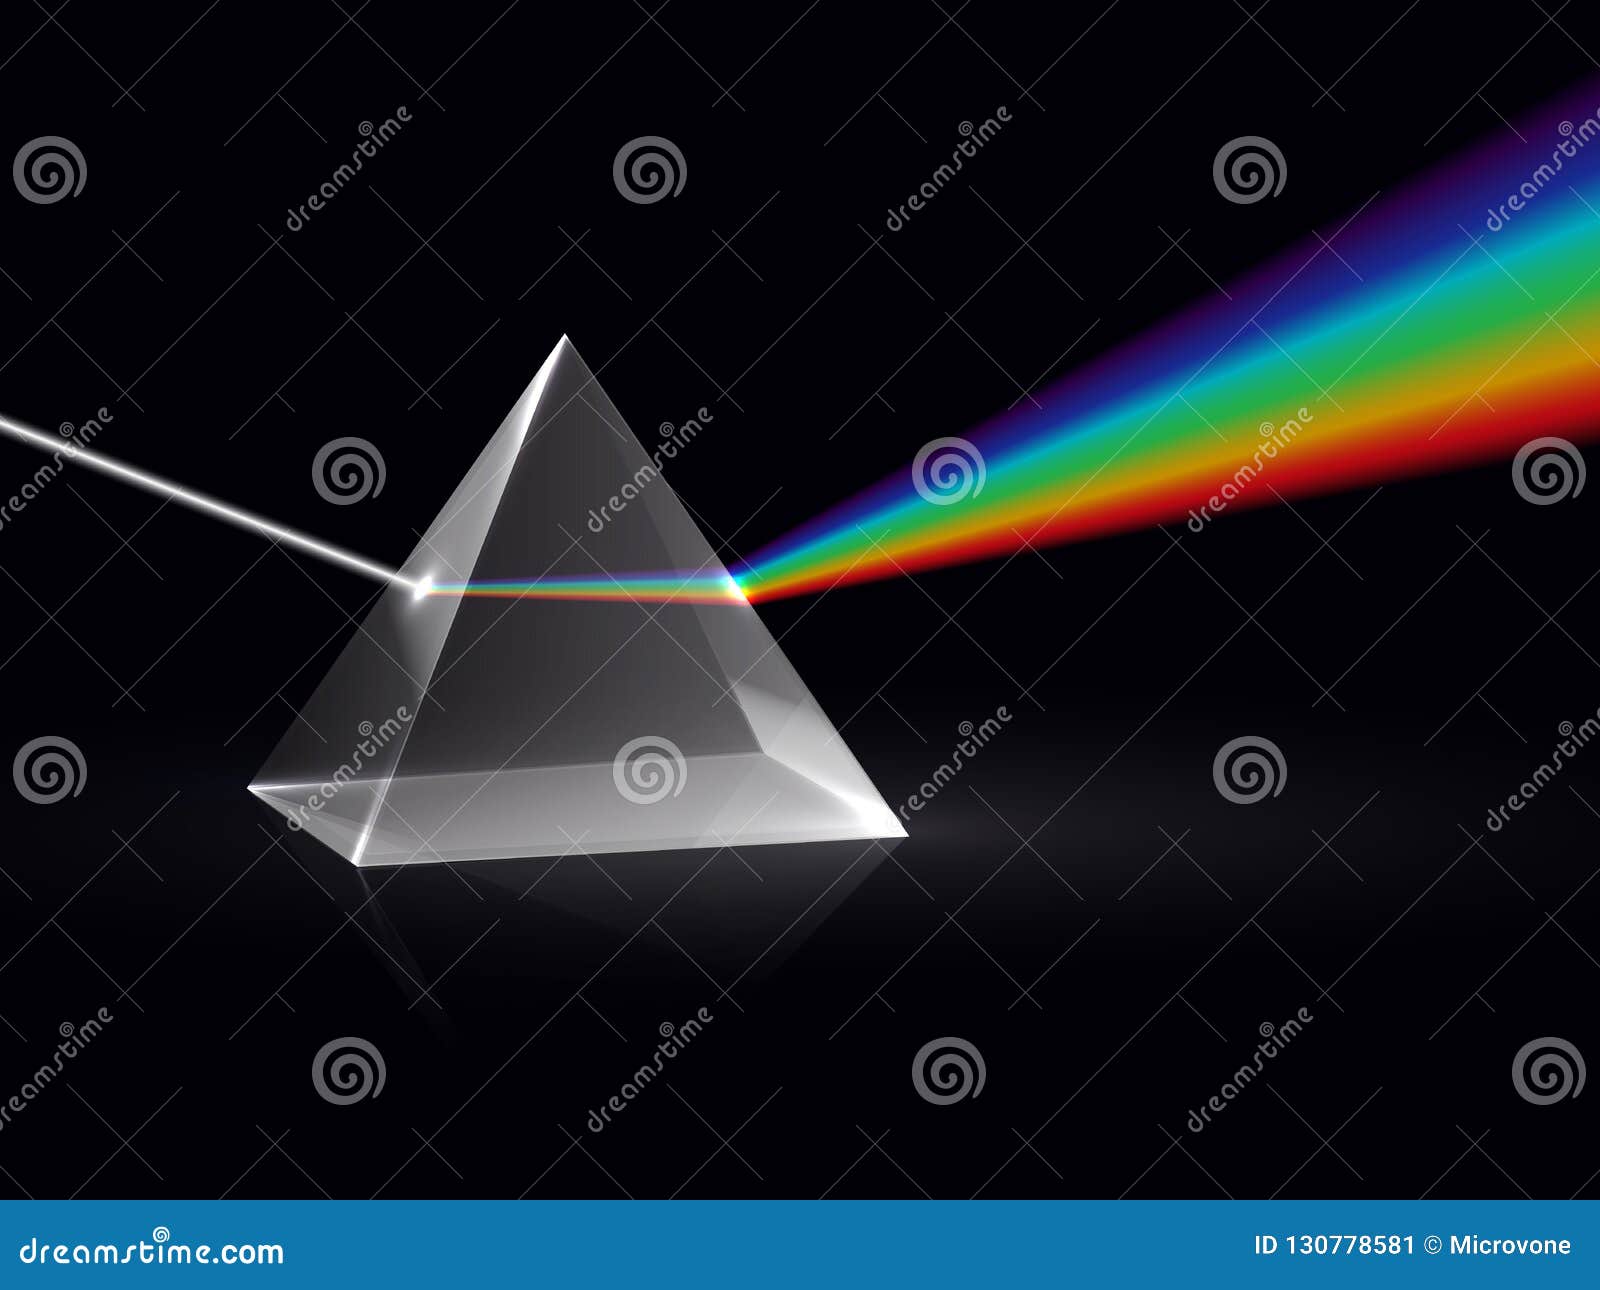 light rays in prism. ray rainbow spectrum dispersion optical effect in glass prism. educational physics 